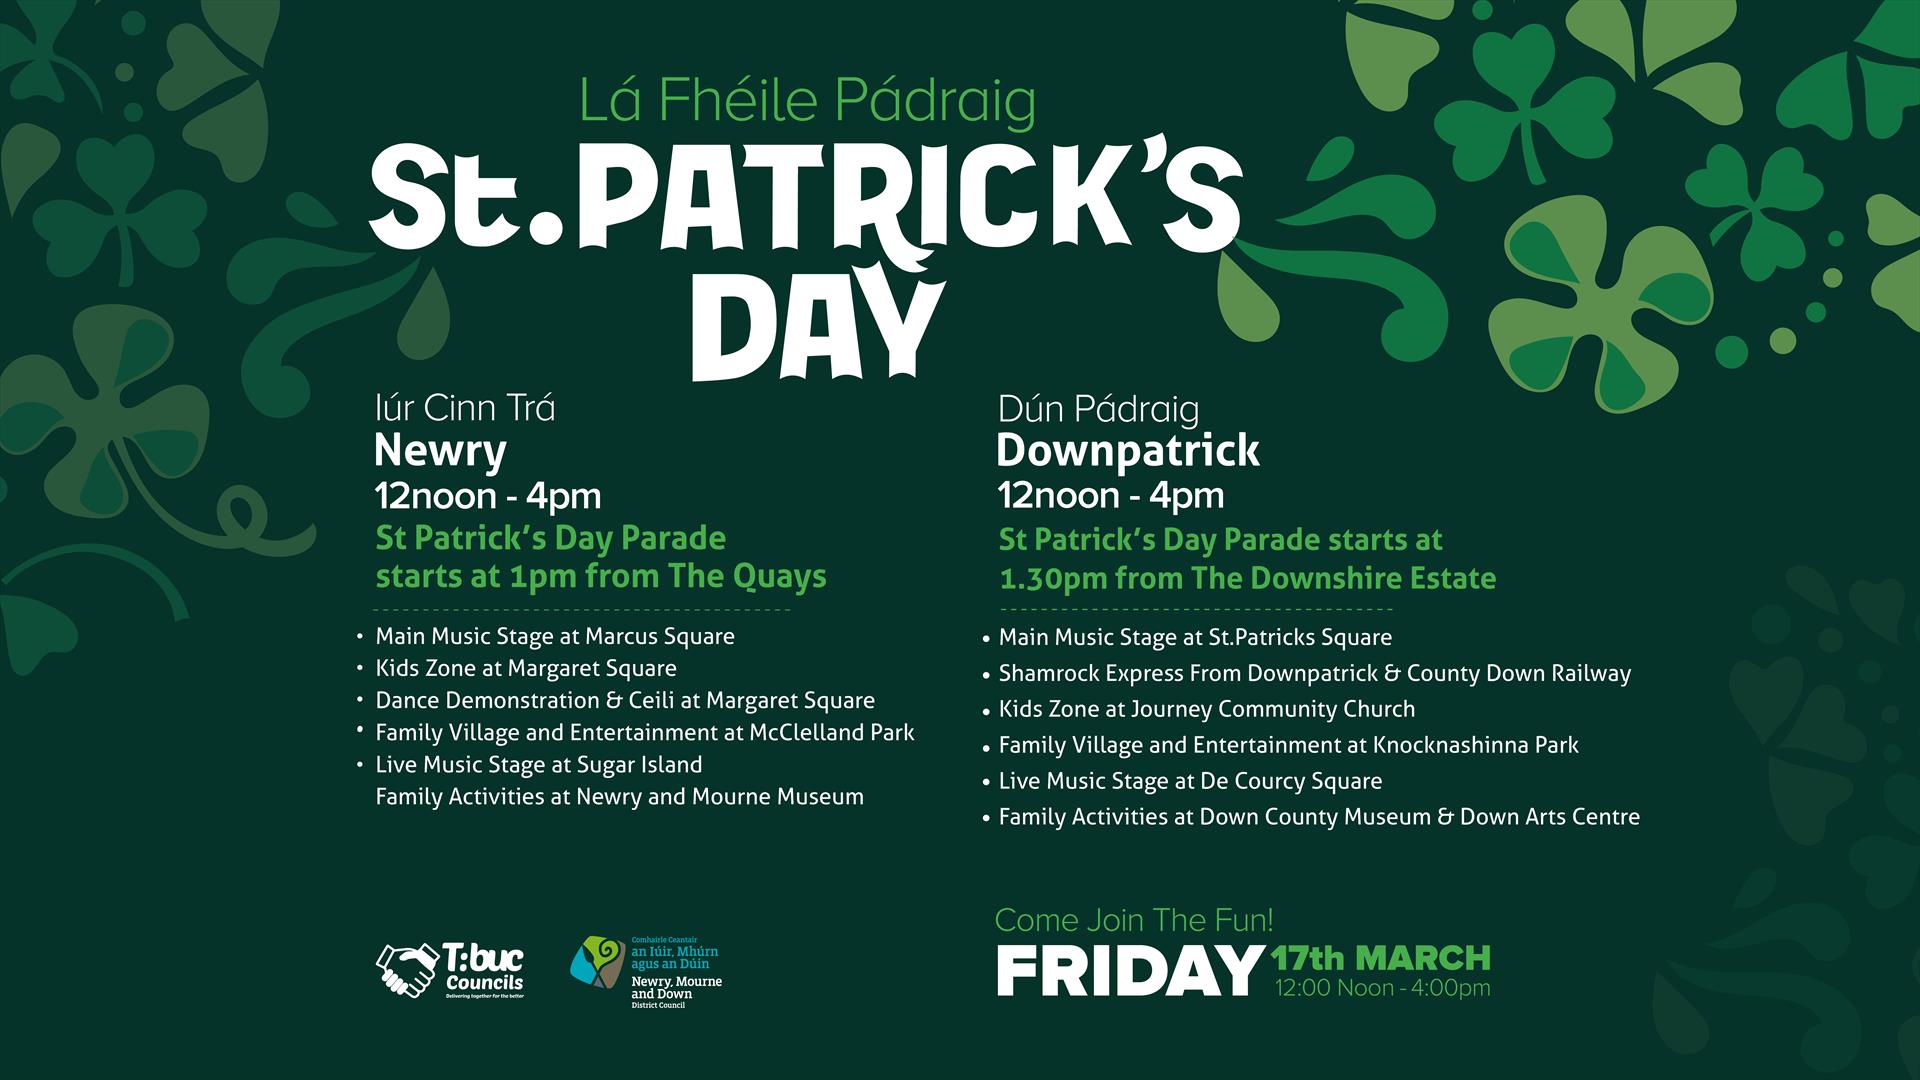 Saint Patrick's Day (March 17th)